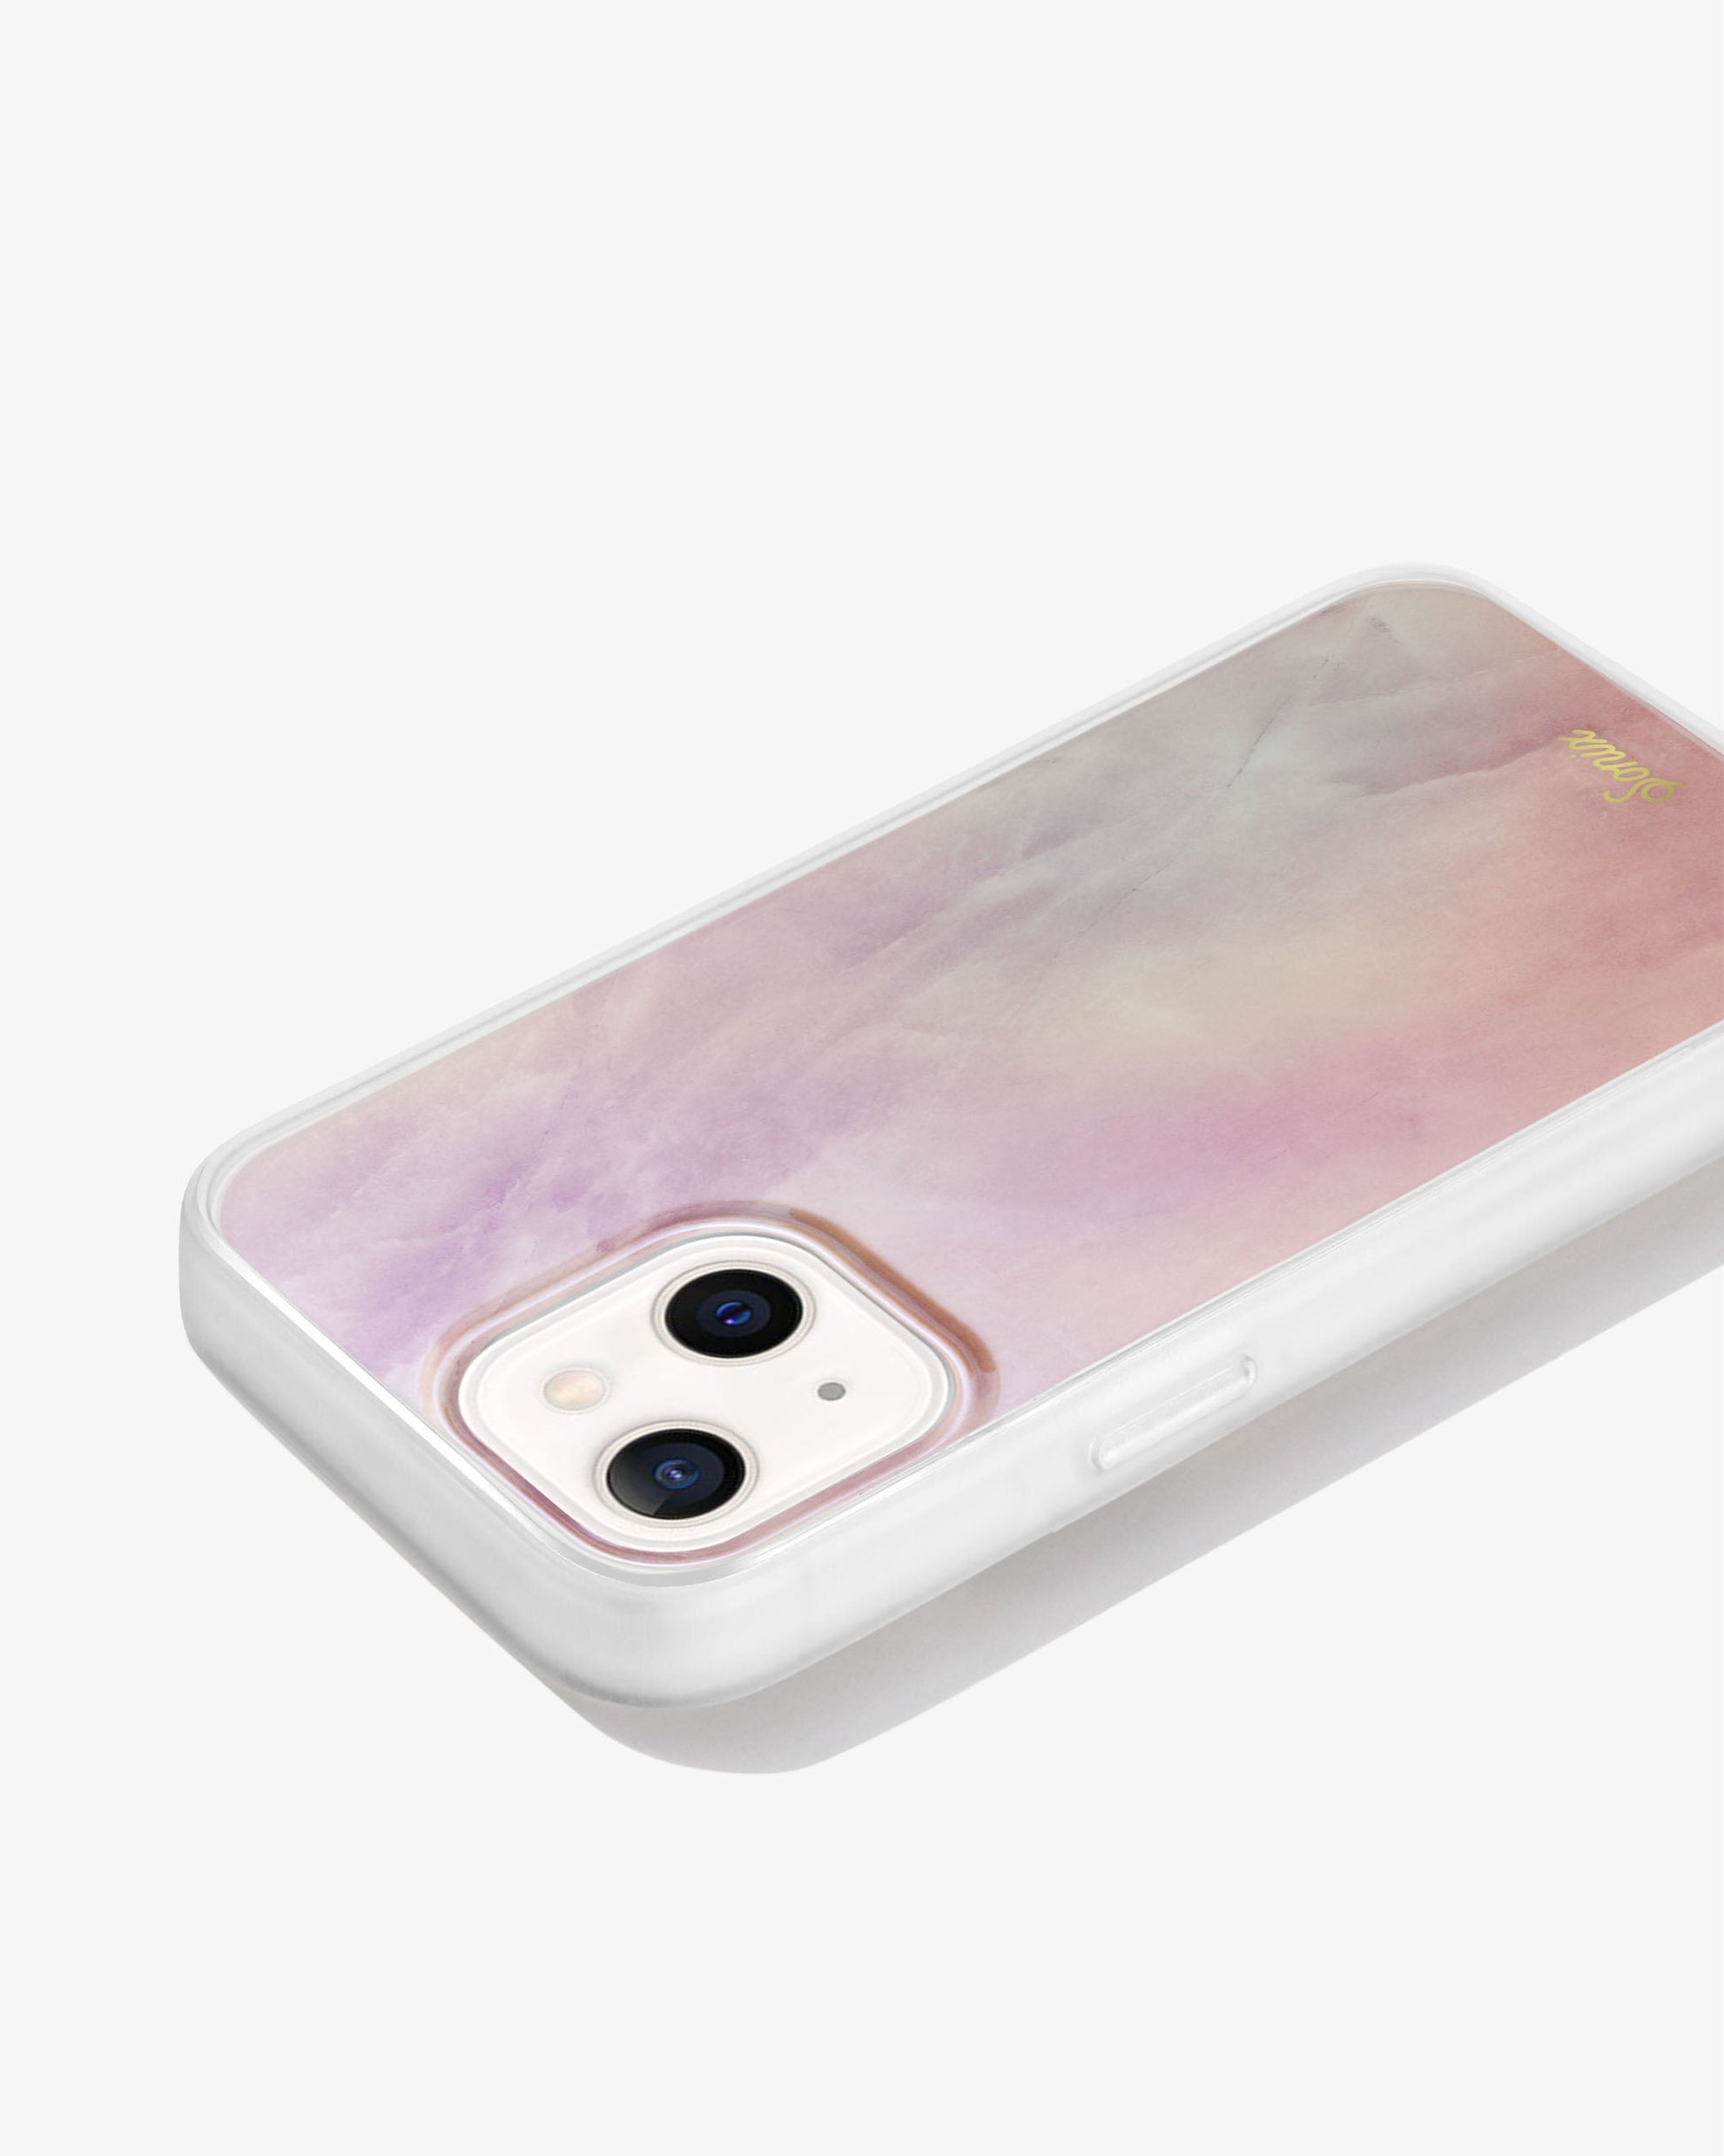 a gleaming pearl design with a pink finish shown on an iphone